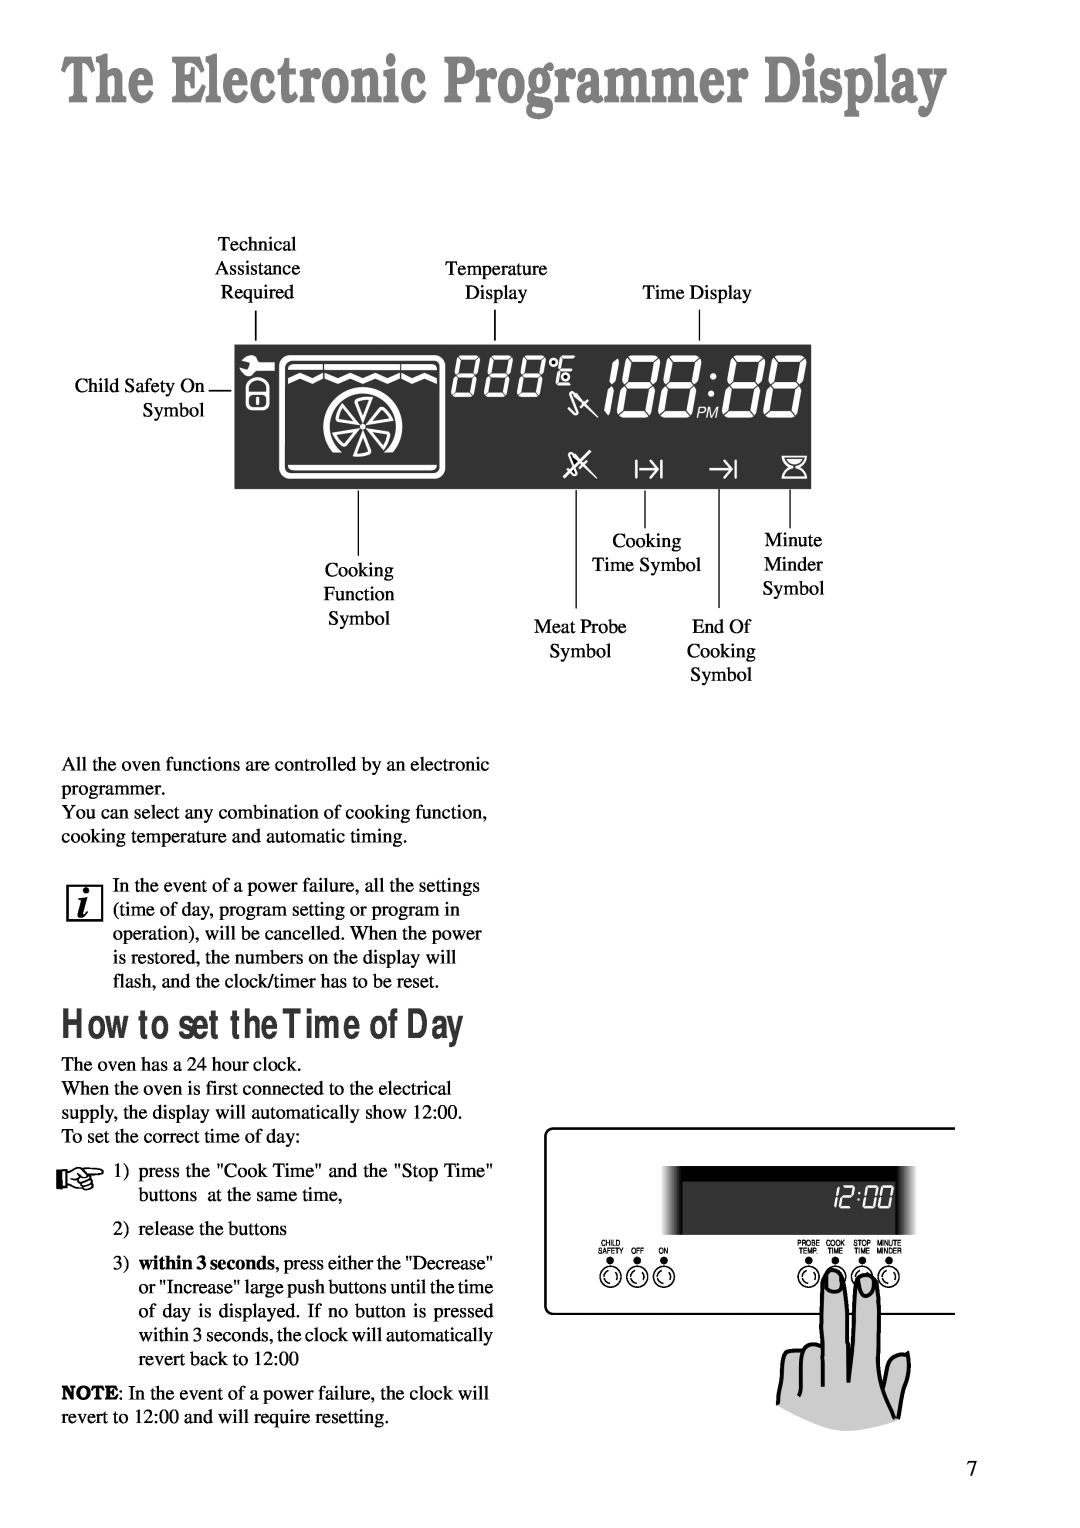 Zanussi ZBM 890 manual How to set theTime of Day, The Electronic Programmer Display 